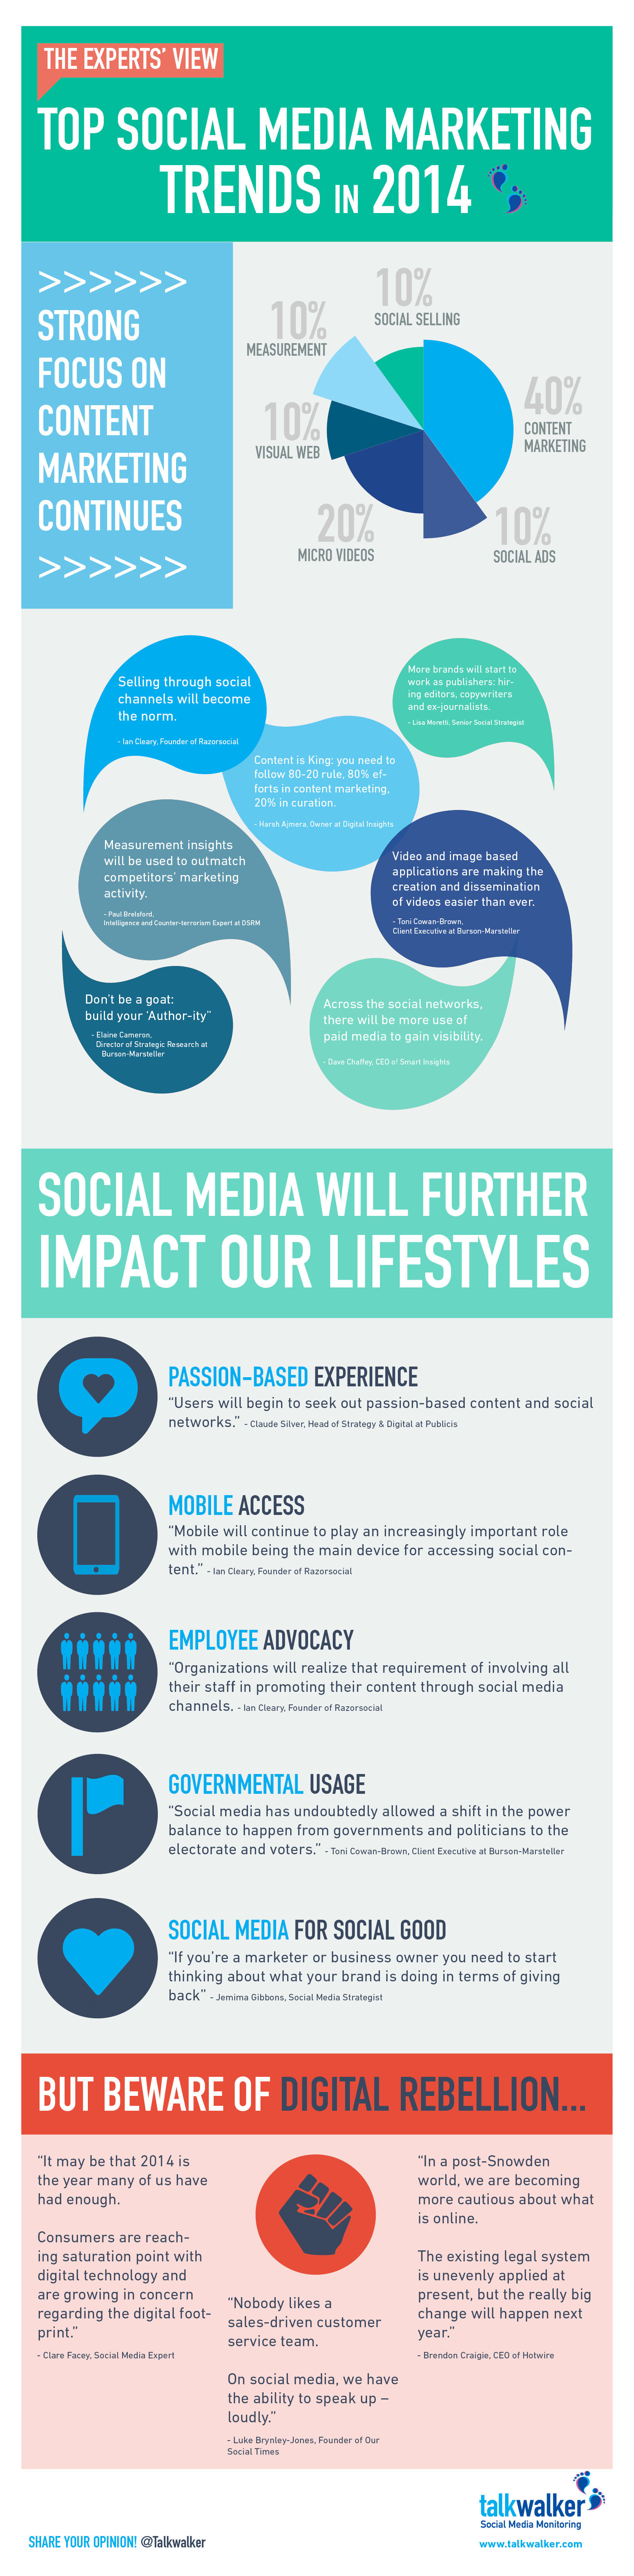 13 Social Media Marketing Trends in 2014 from the Experts